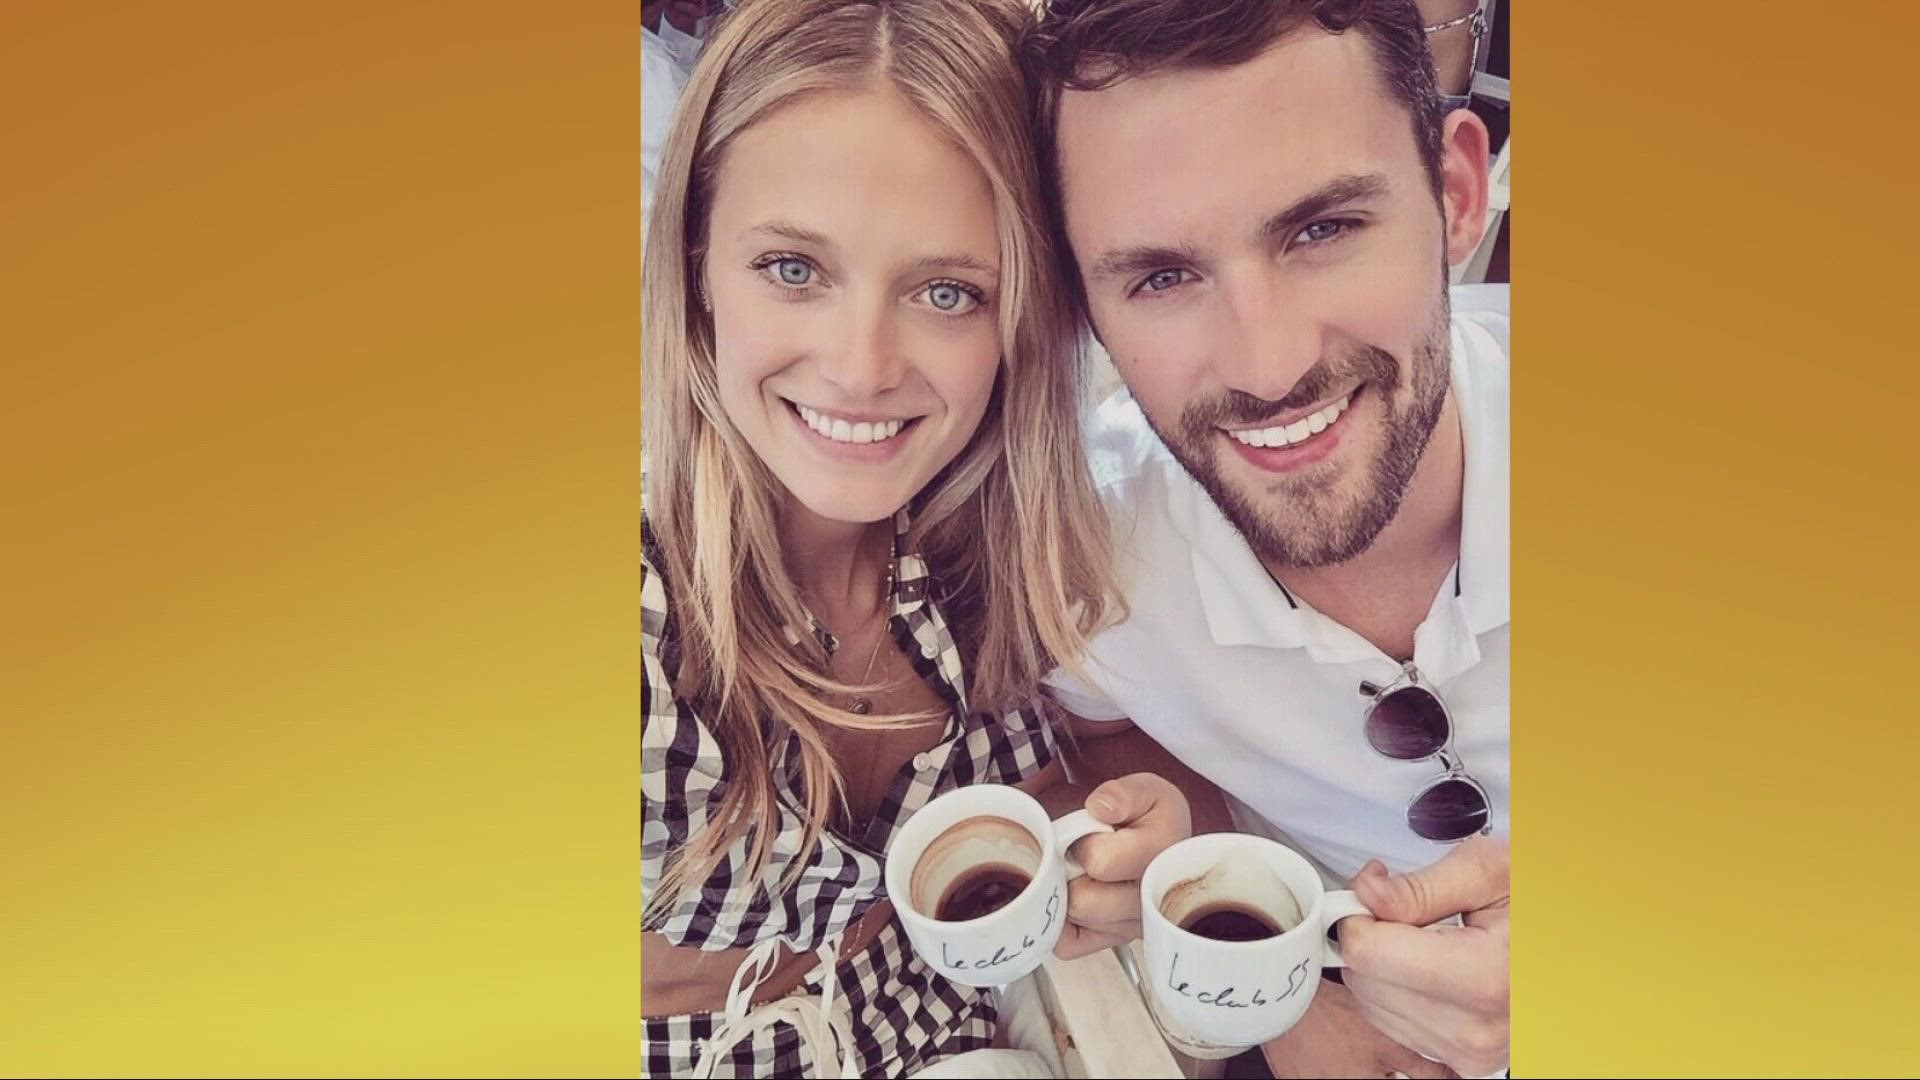 Nearly 18 months after announcing their engagement, Cleveland Cavaliers forward Kevin Love and his longtime girlfriend, model Kate Bock, got married in NY City.